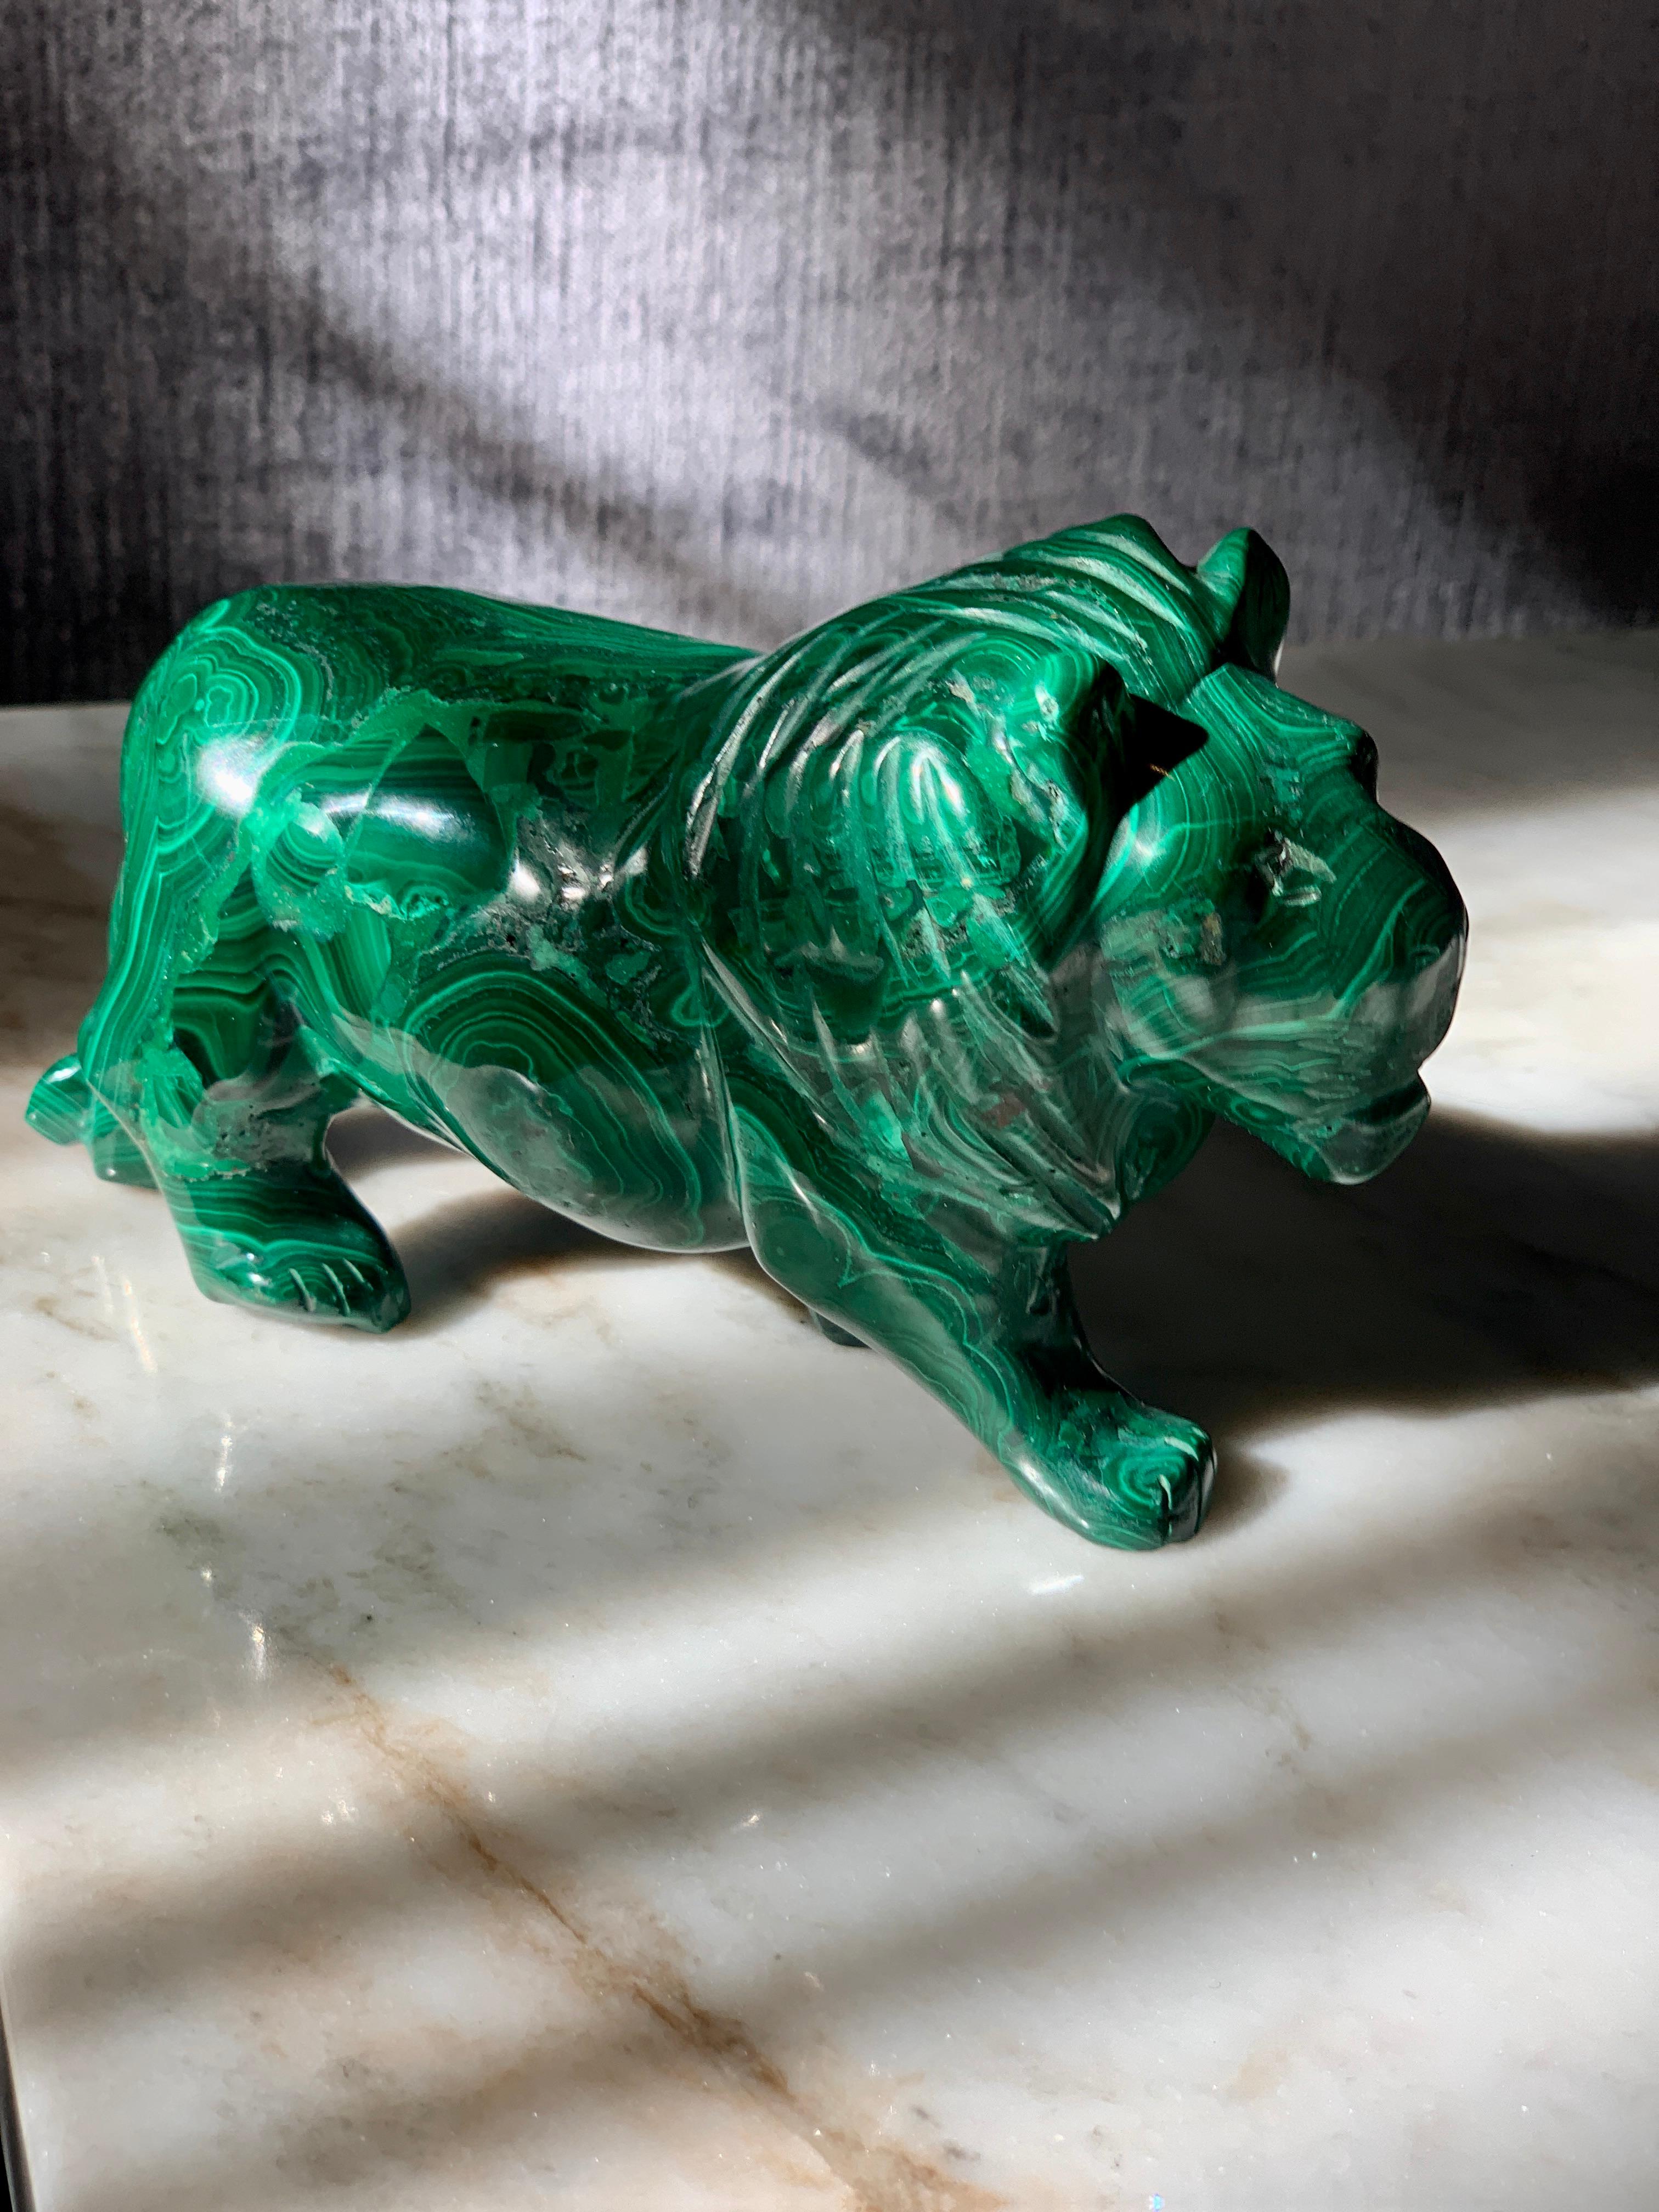 A Malachite lion - perfectly suited for a desk object / sculpture or paperweight. A perfect gift for anyone who loves organic, yet chic pieces.